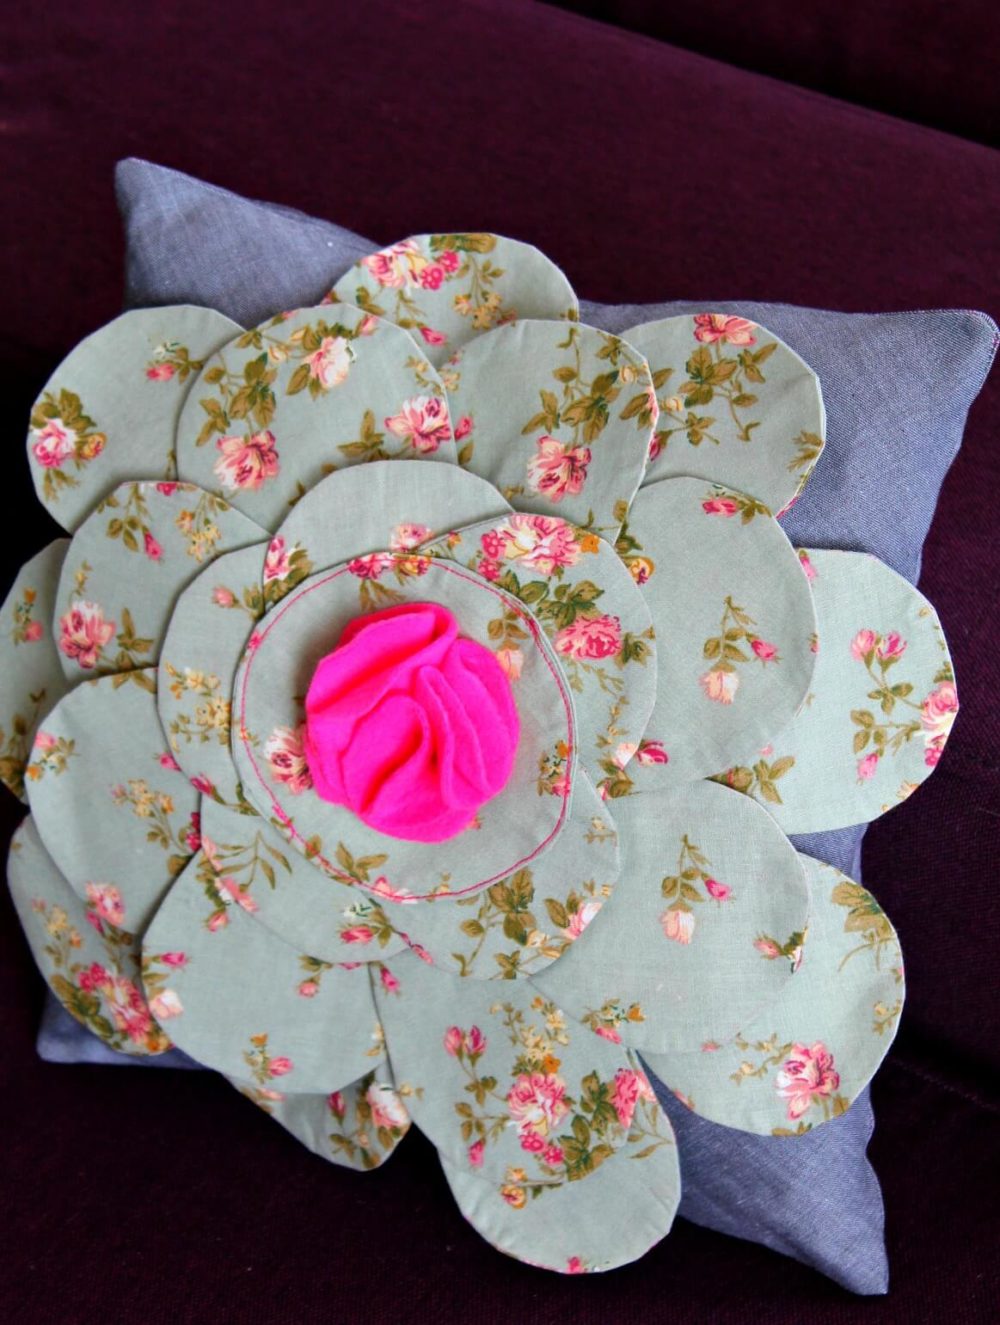 Sew this stunning easy flower pillow pattern | Easy Peasy Creative Ideas